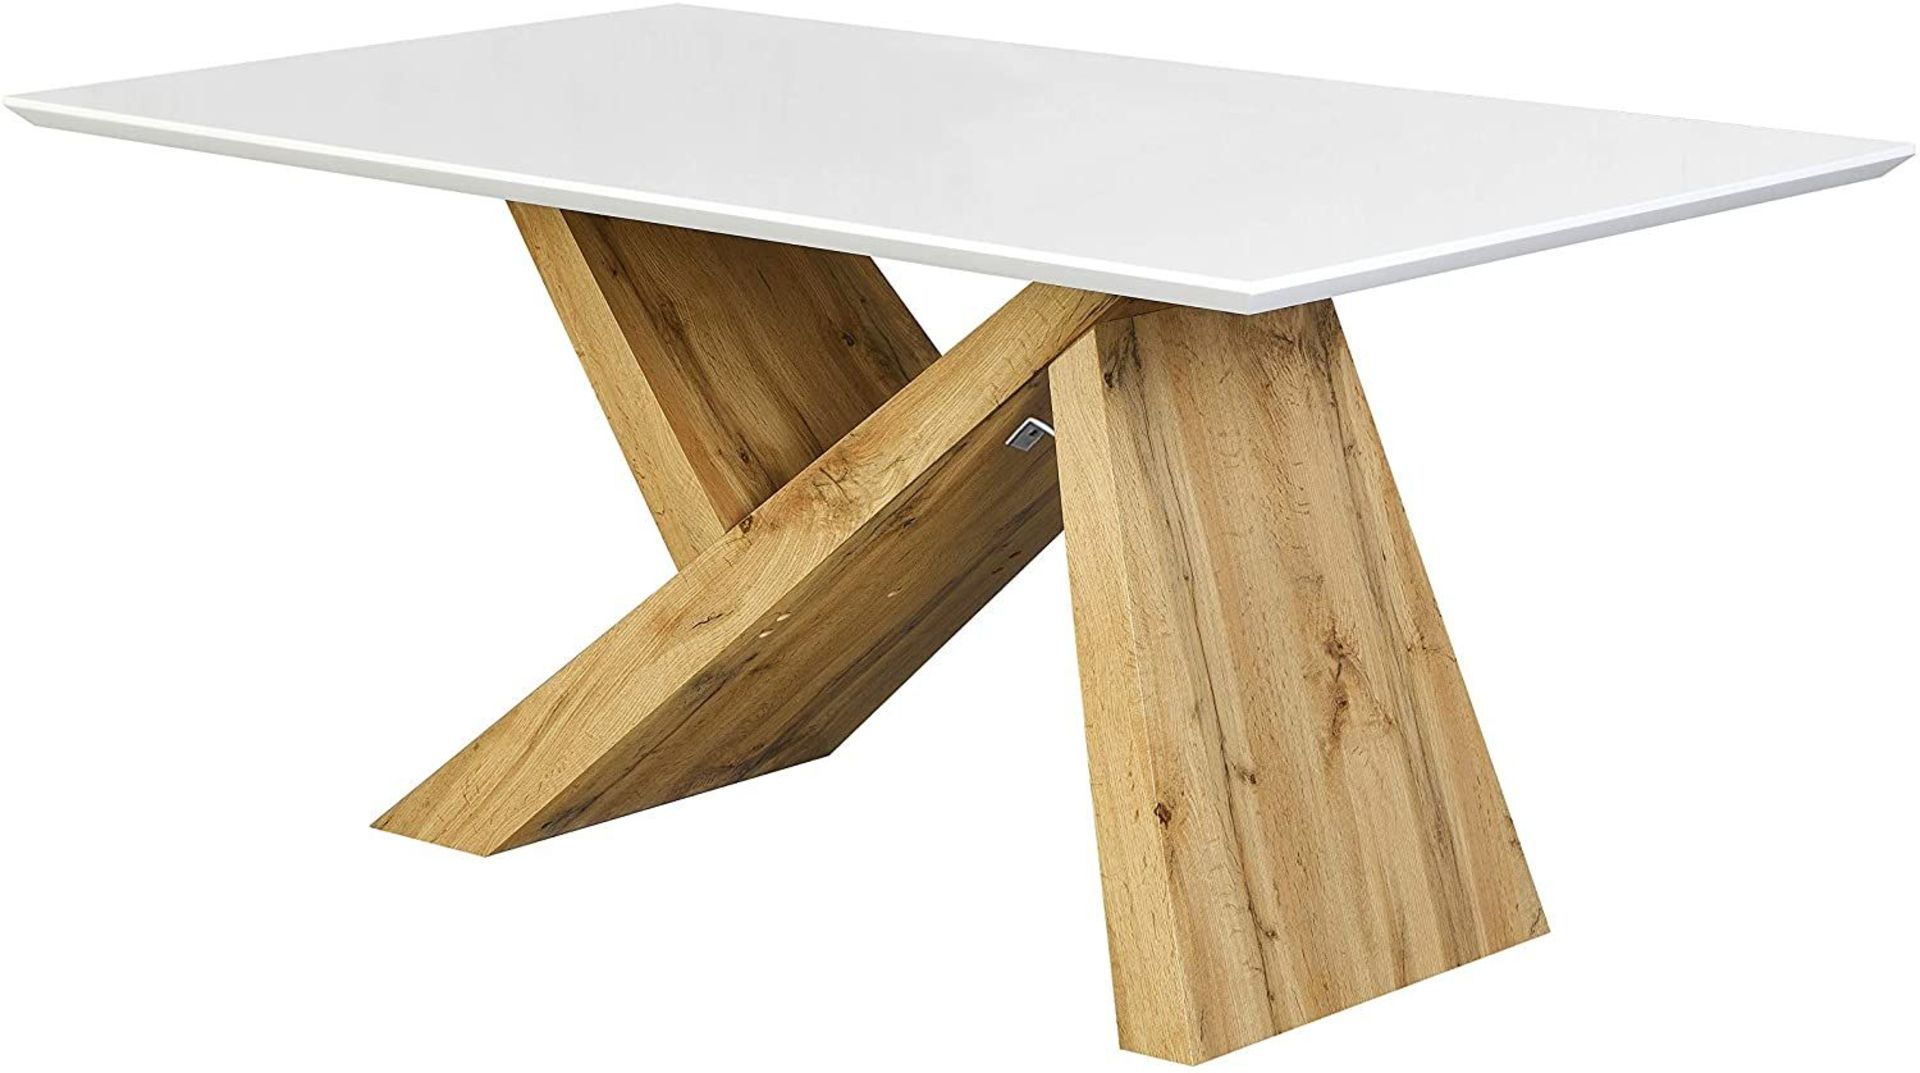 Orillia Oak Effect 160 cm Dining Table with White Top. - BI. RRP £389.99. Featuring high gloss white - Image 2 of 2